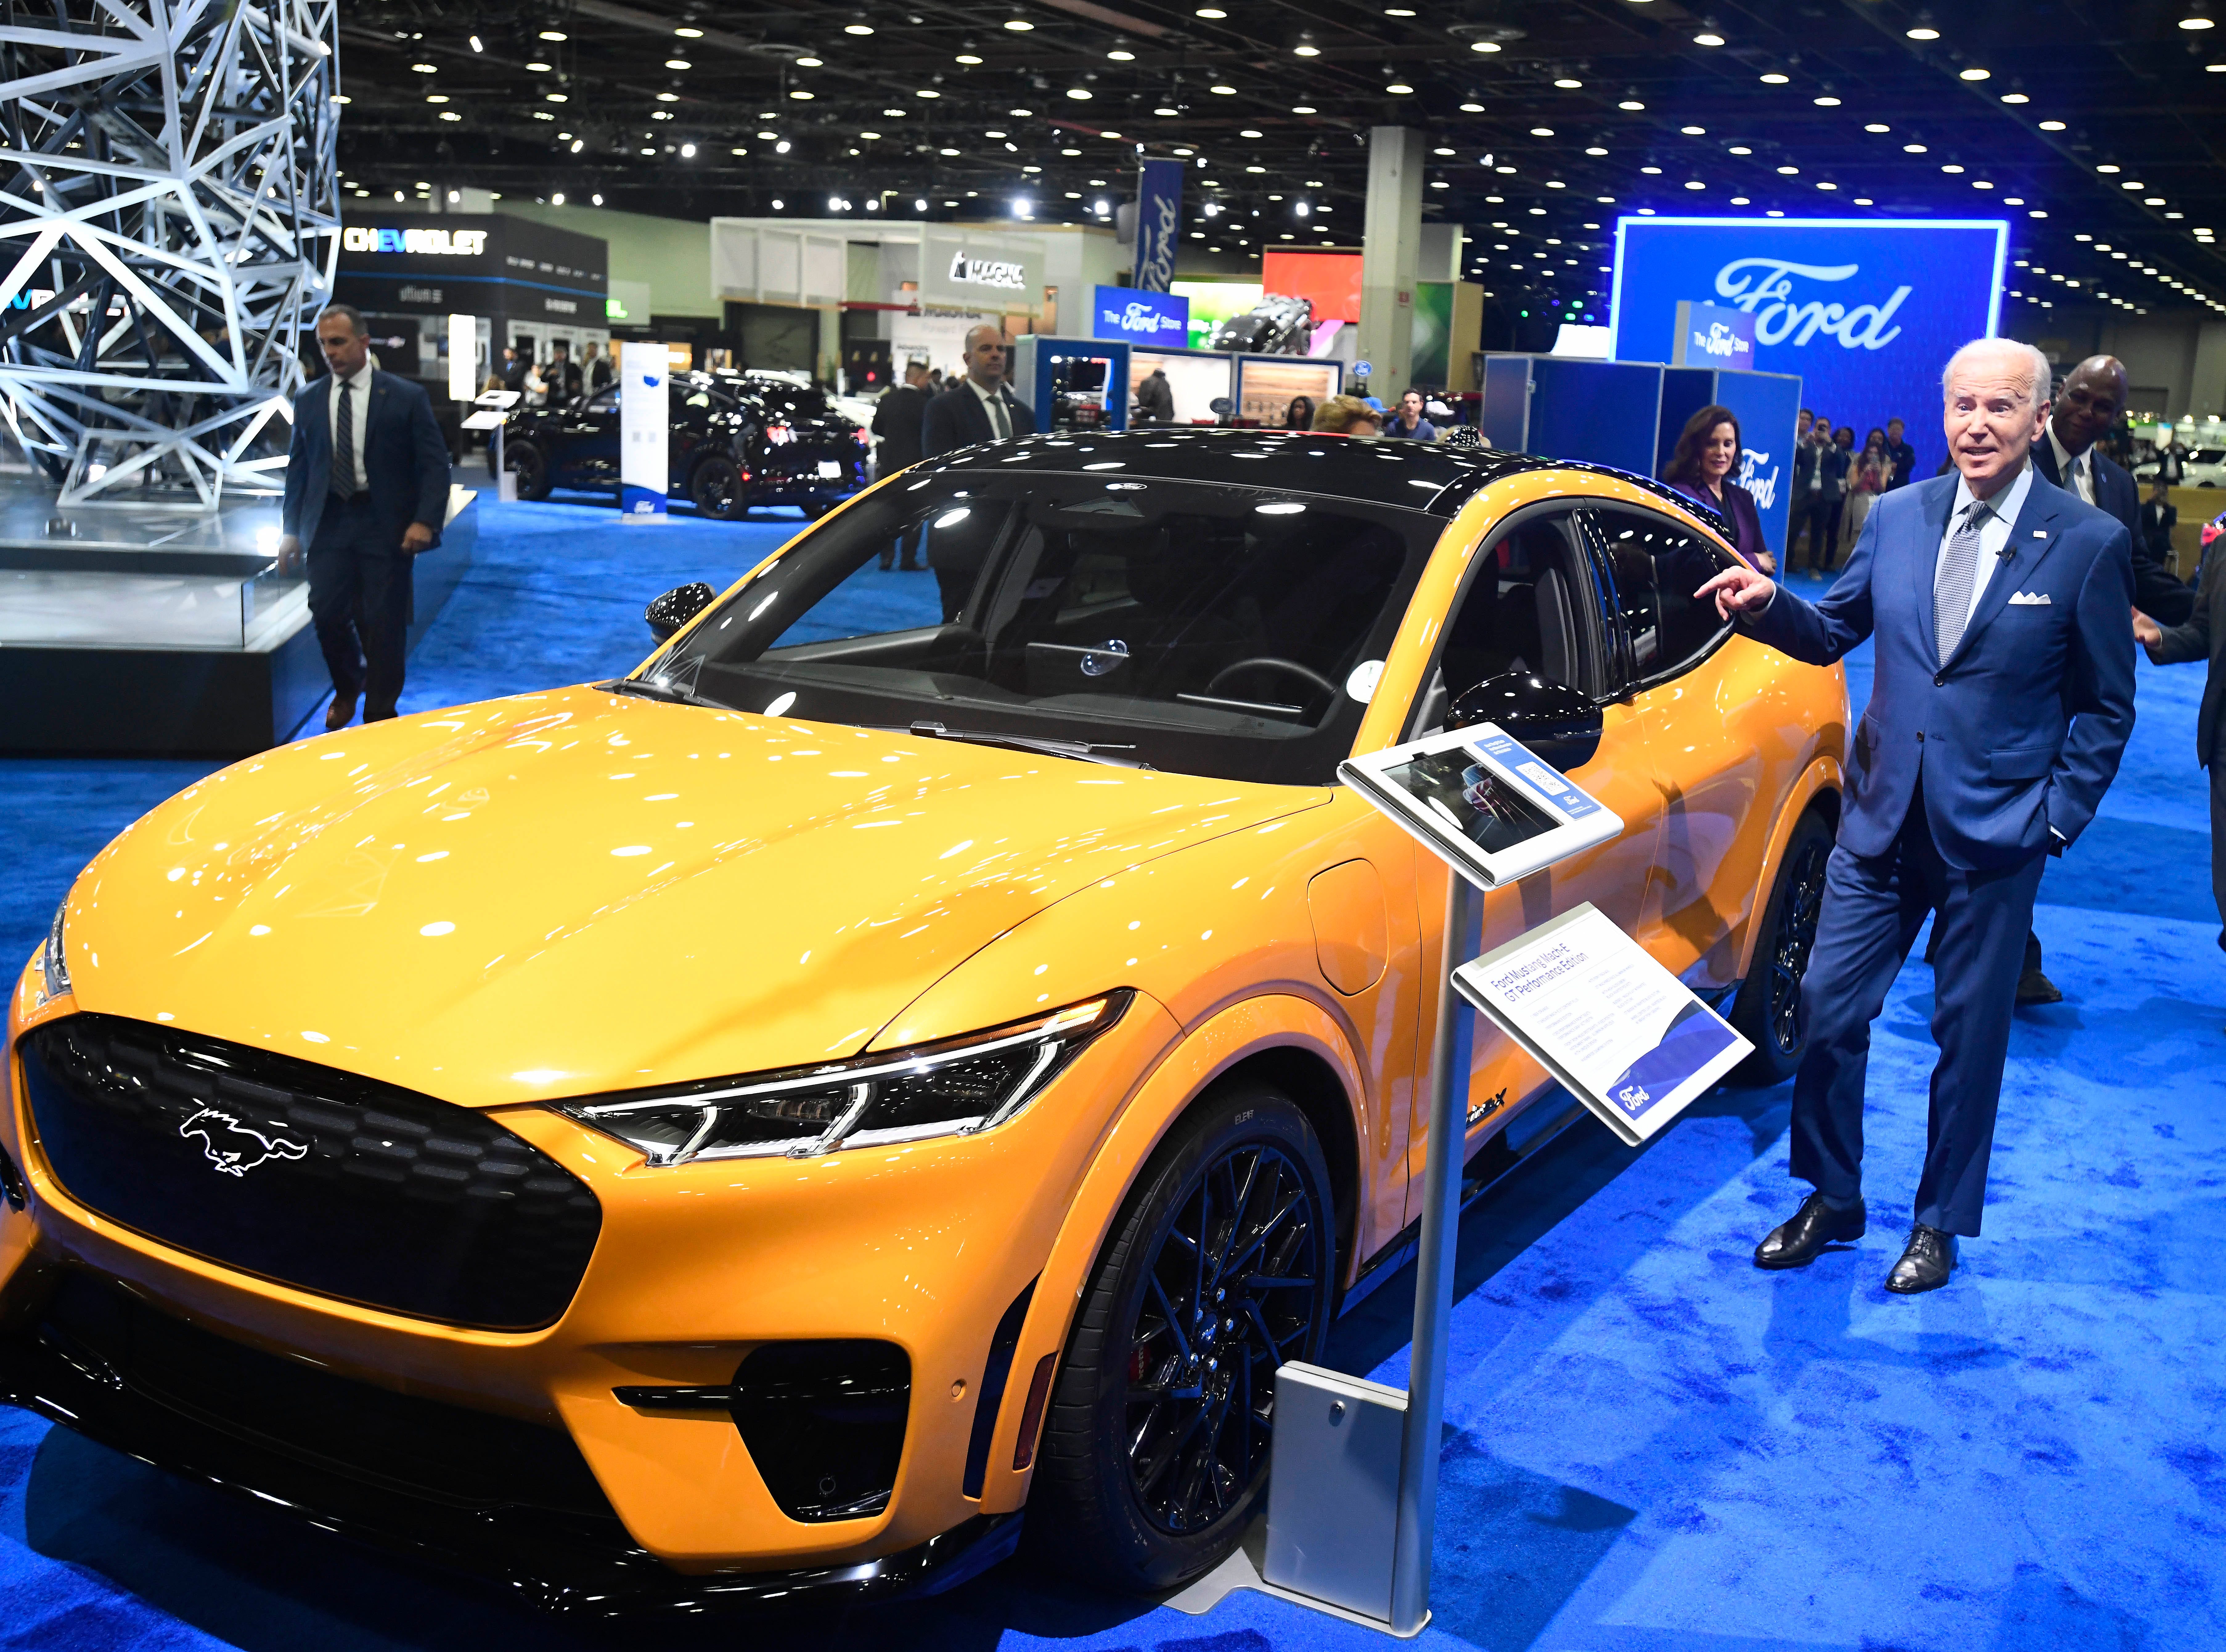 President Joe Biden looks over a Ford Mustang Mach-E during a tour of the 2022 North American International Auto Show in Detroit, Michigan on September 14, 2022.